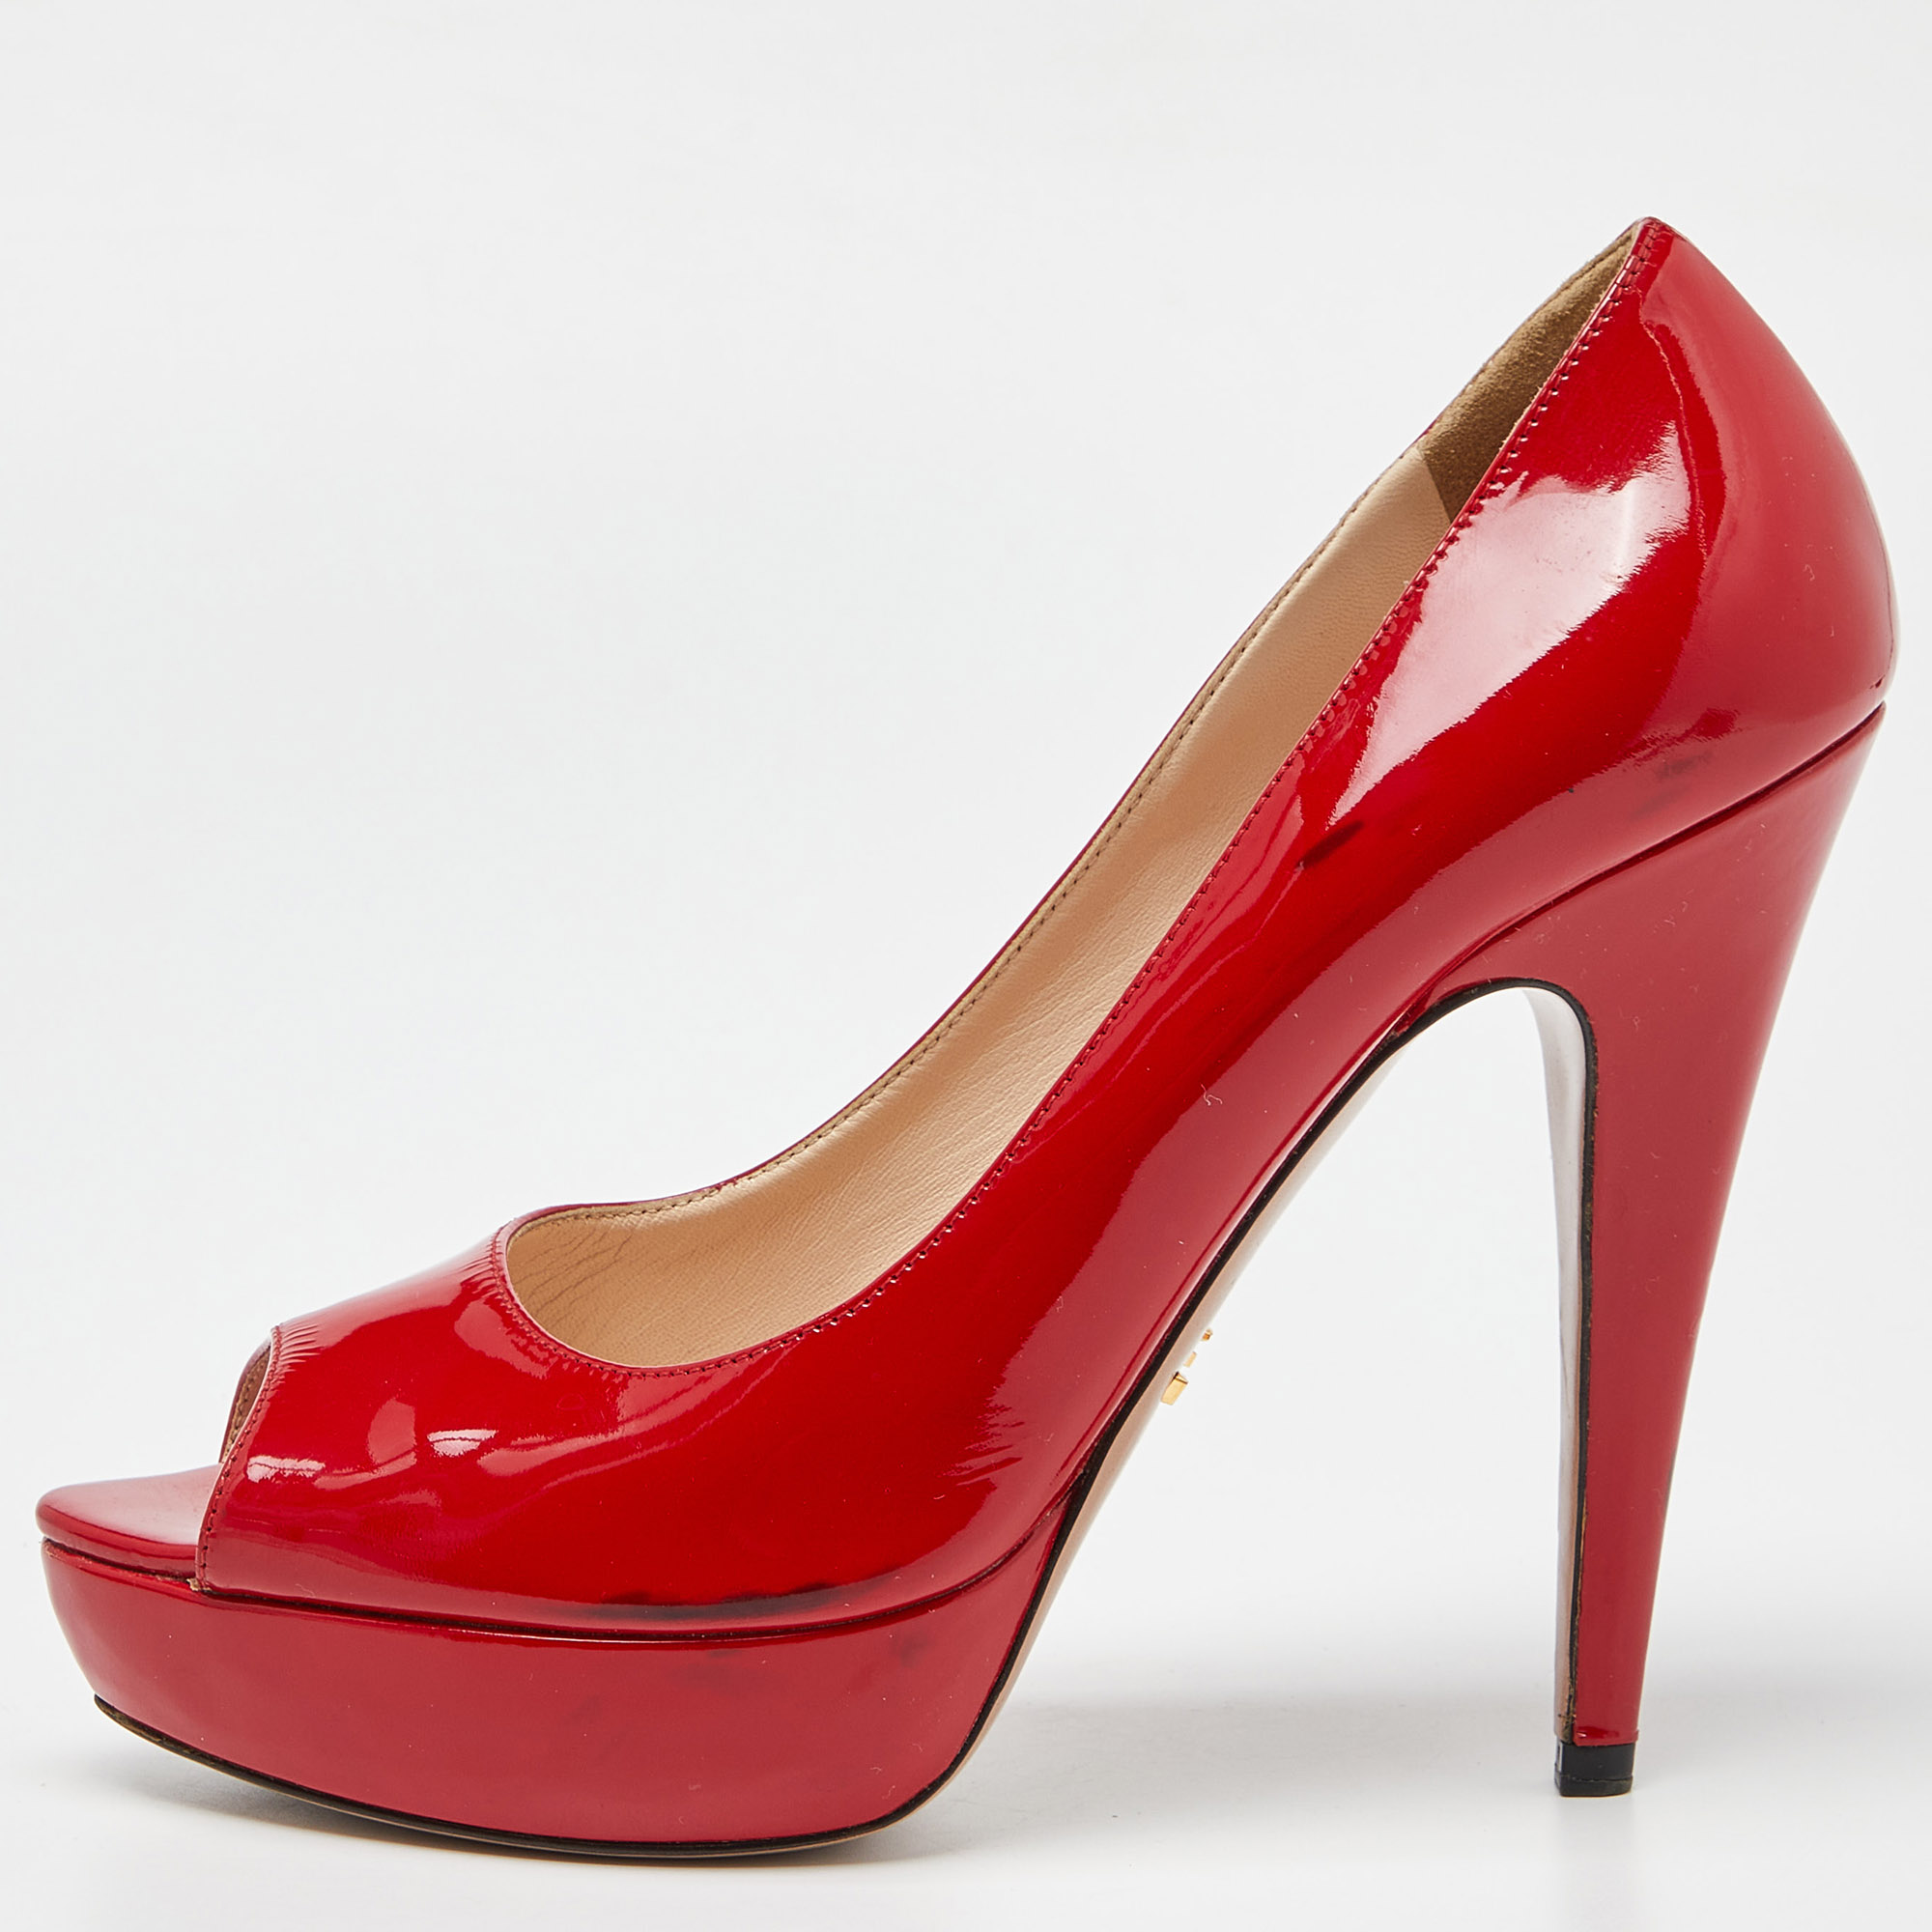 Pre-owned Prada Red Patent Leather Peep Toe Platform Pumps Size 39